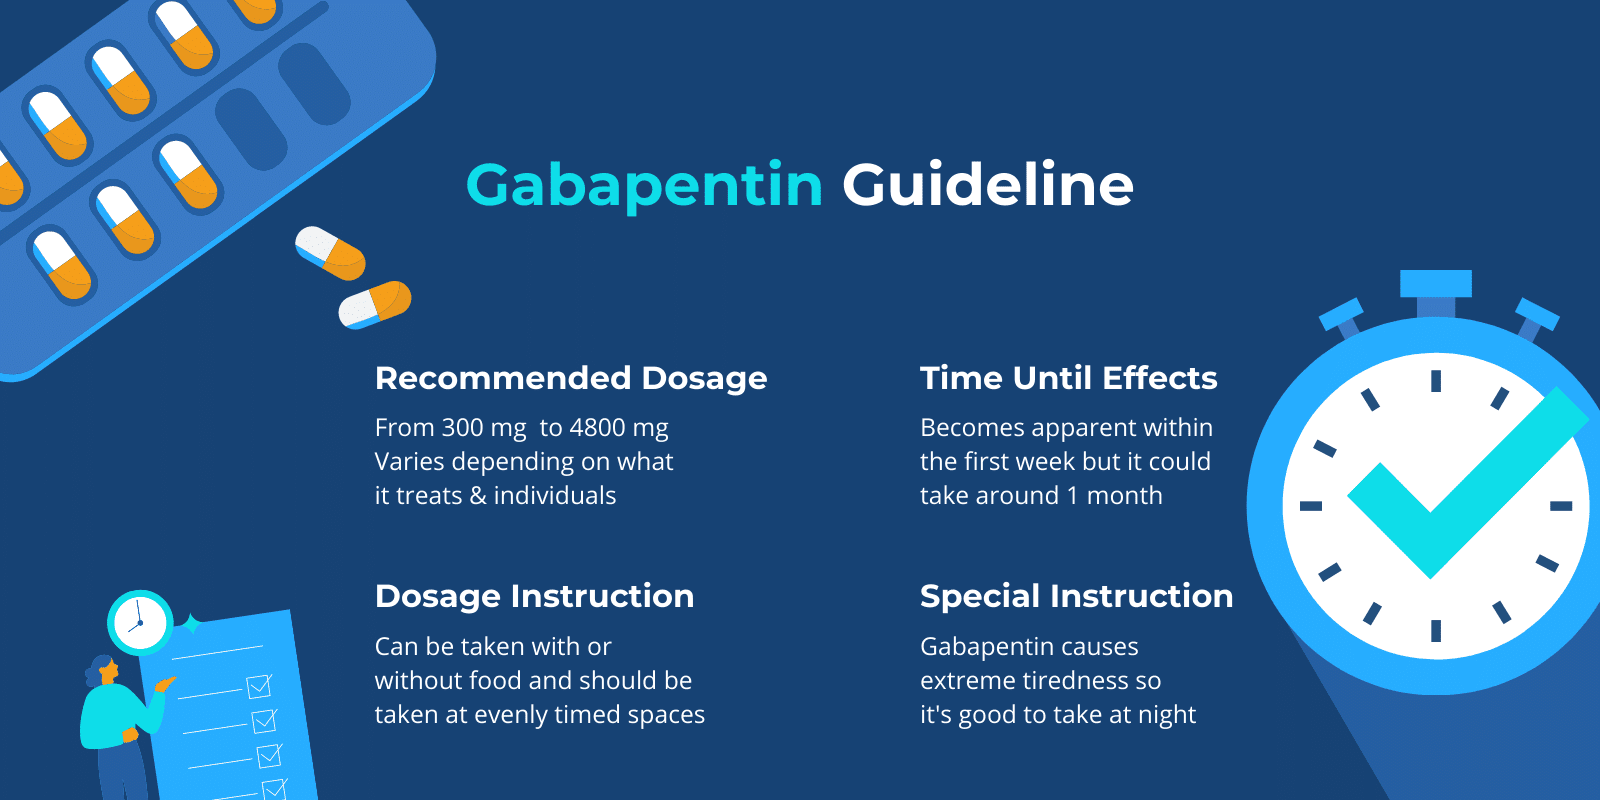 Gabapentin guidelines on recommended dosage, dosage instruction, time until effects, and special instruction for taking gabapentin infographic